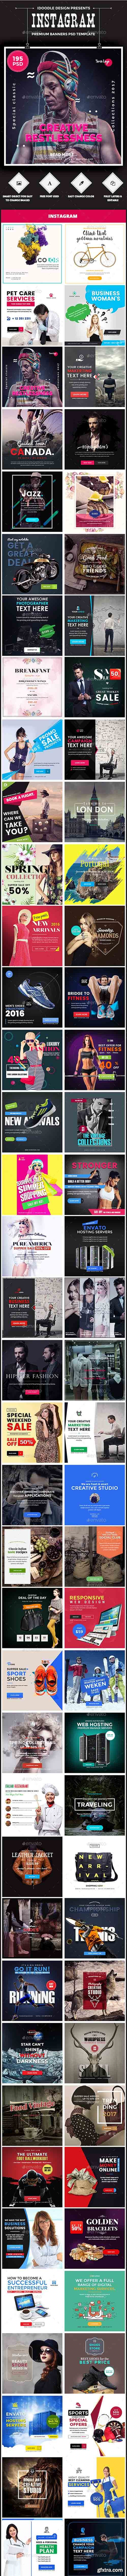 Promotion Instagram Banners Ads - 195 PSD 14962085